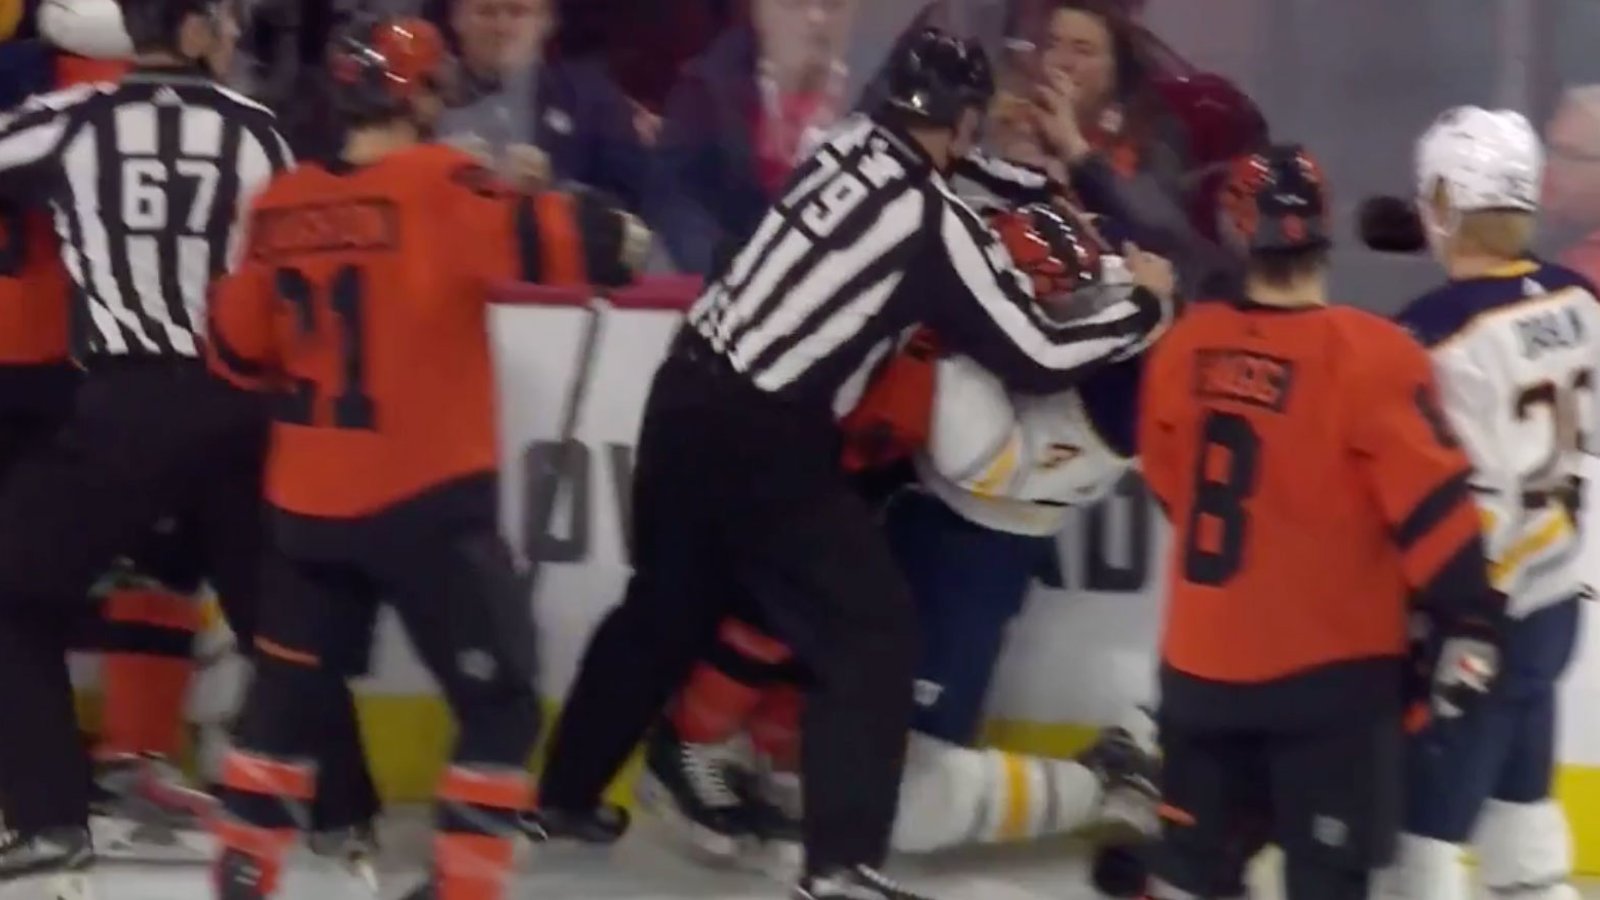 Breaking: Hartman lands vicious hit on Dahlin, gets in tussle in first game with the Flyers! 